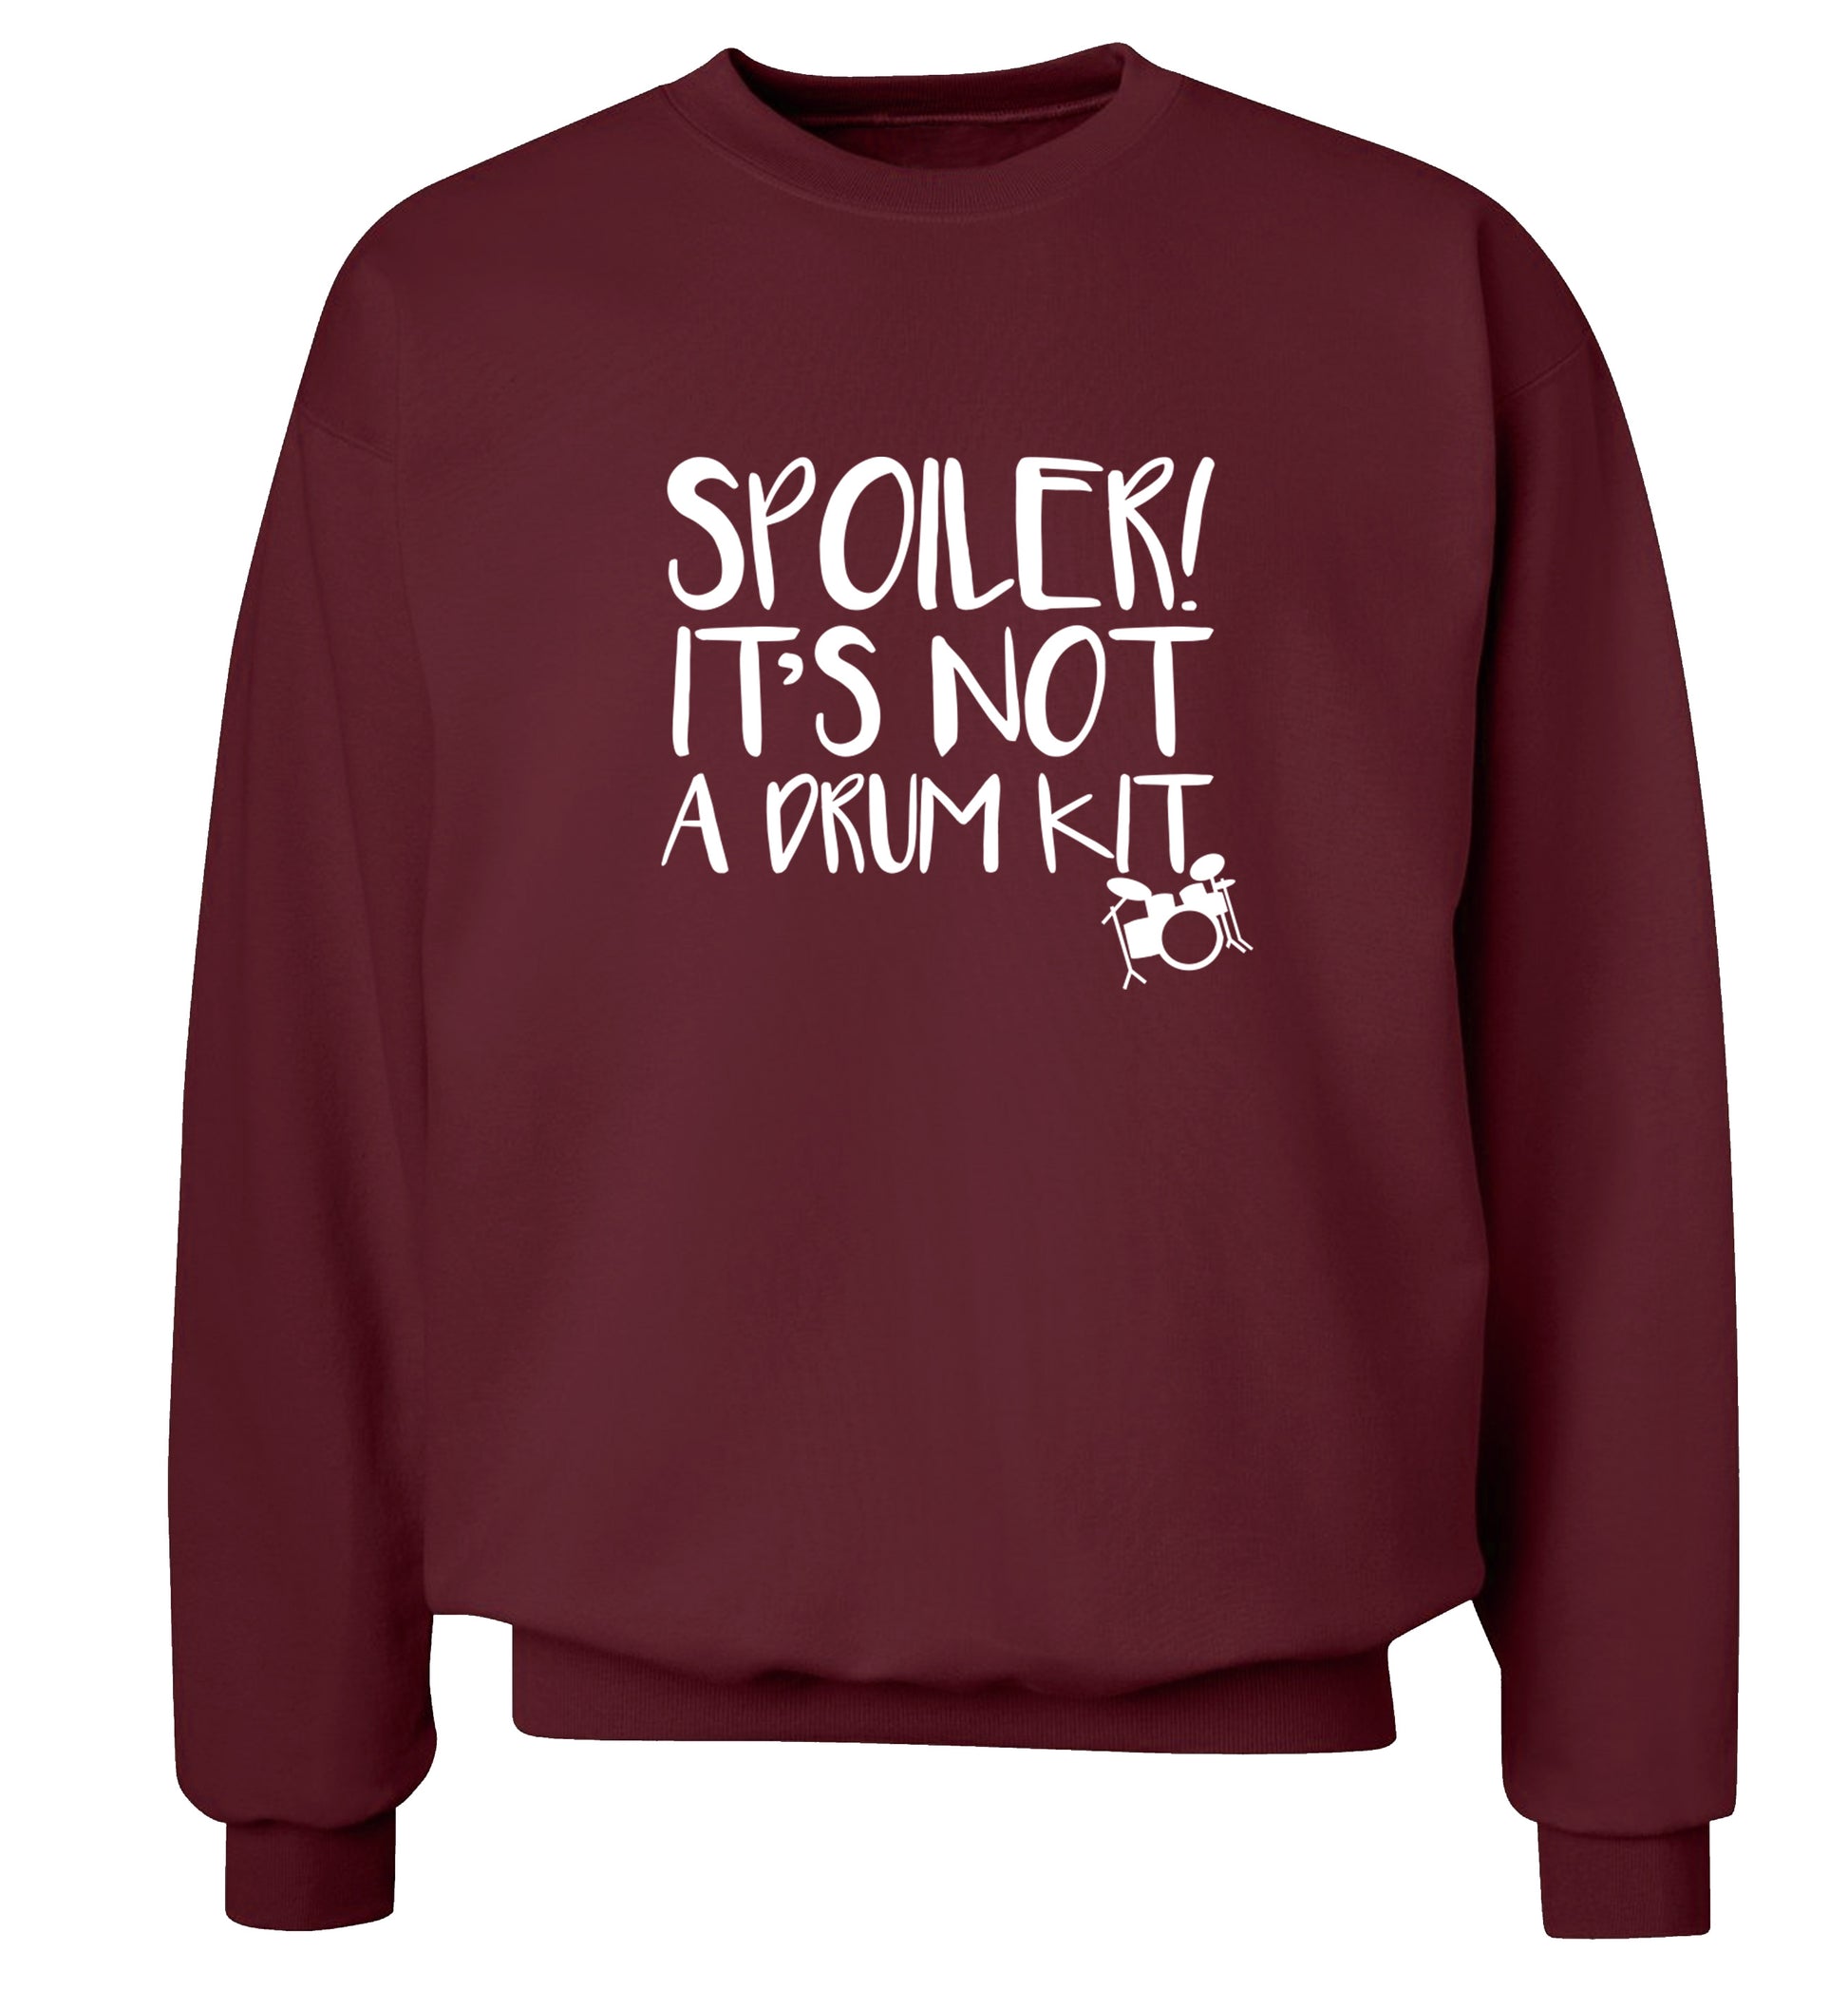 Spoiler it's not a drum kit Adult's unisex maroon Sweater 2XL